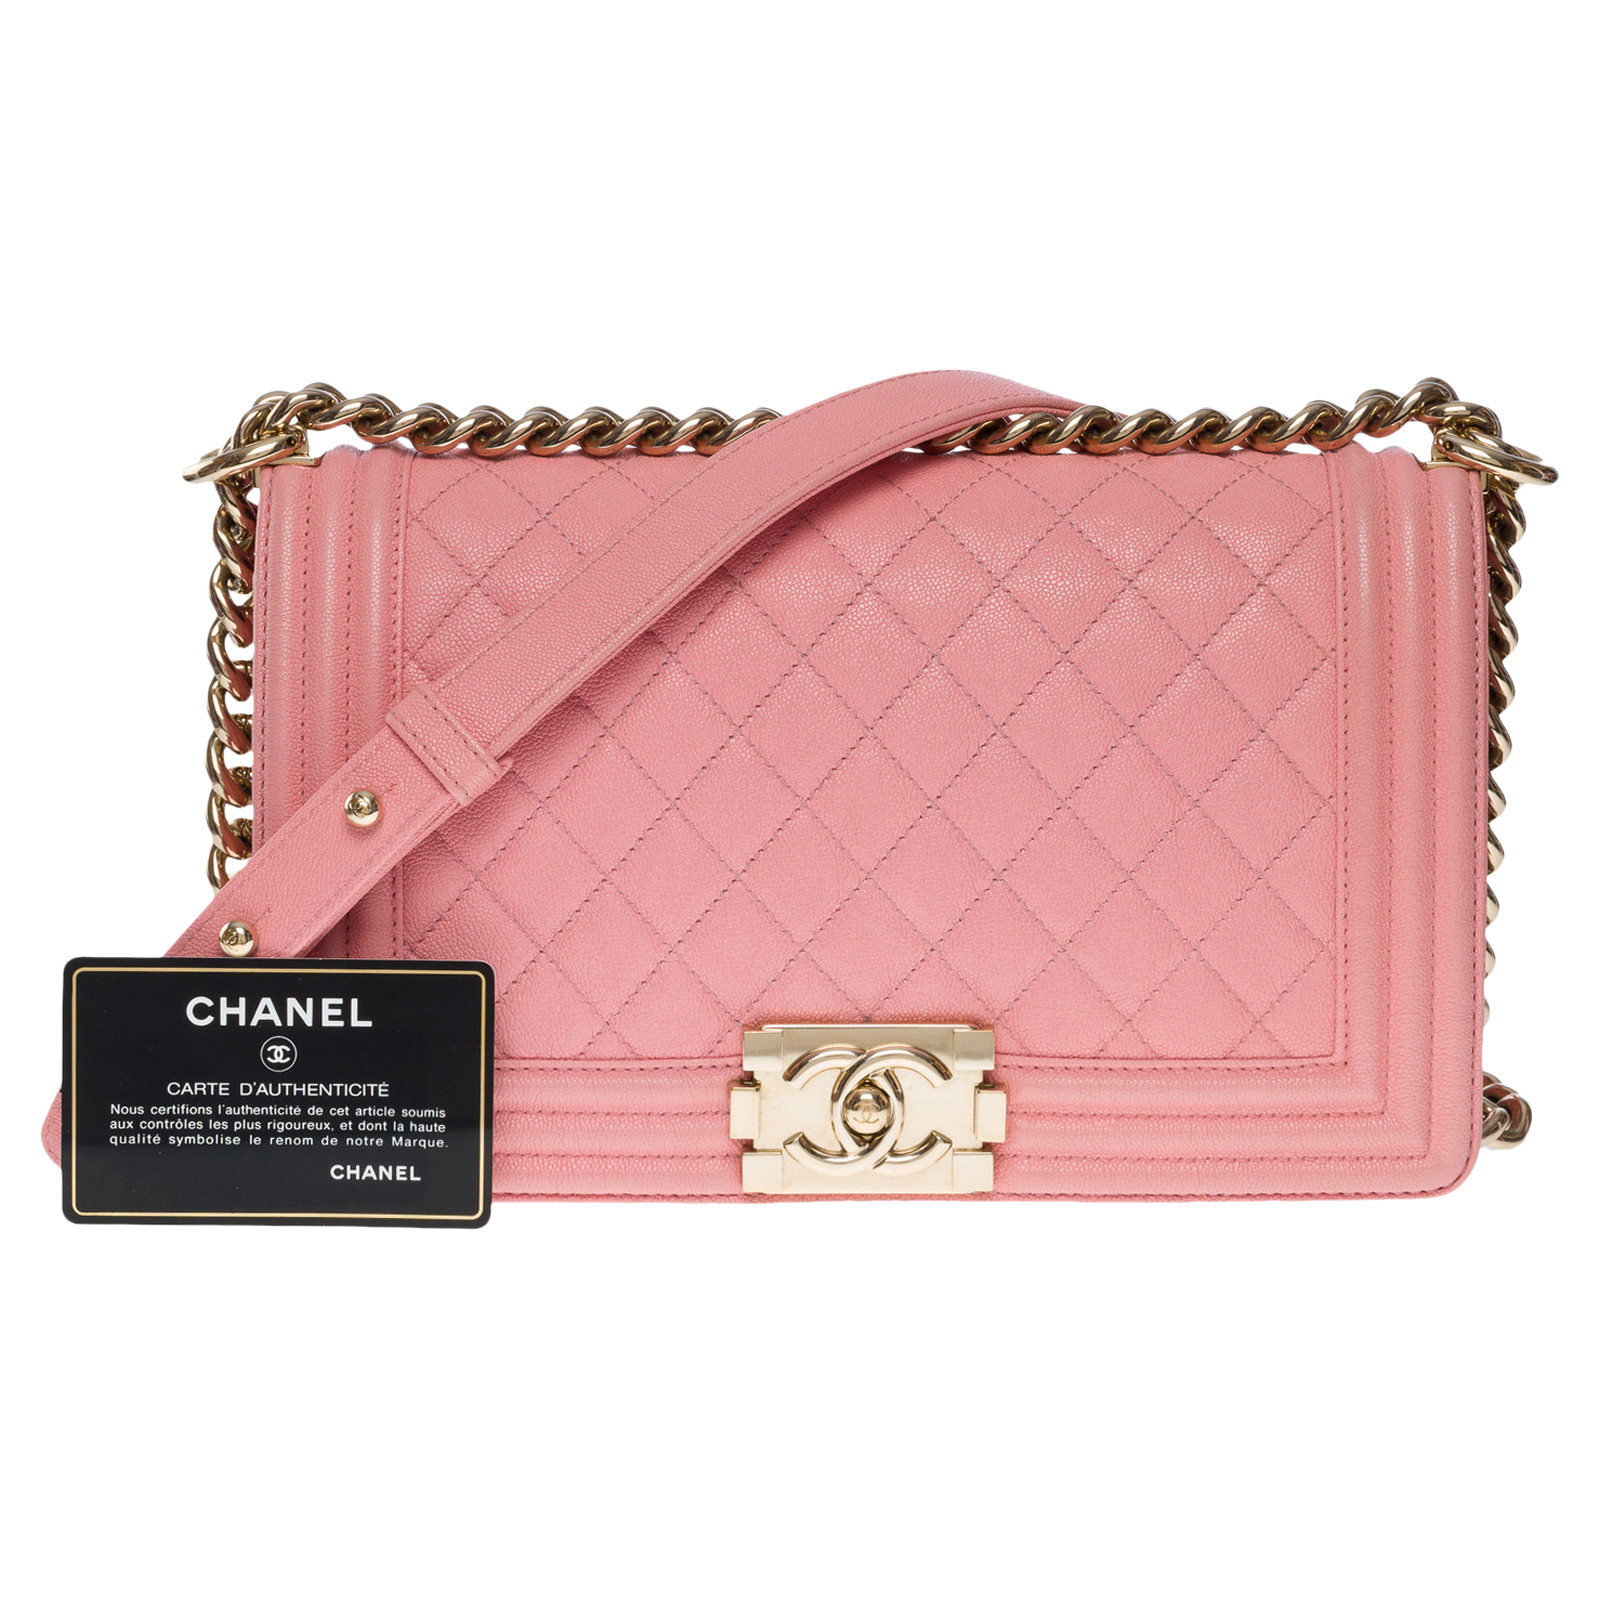 CHANEL: The most beautiful second hand pieces from Paris + 10